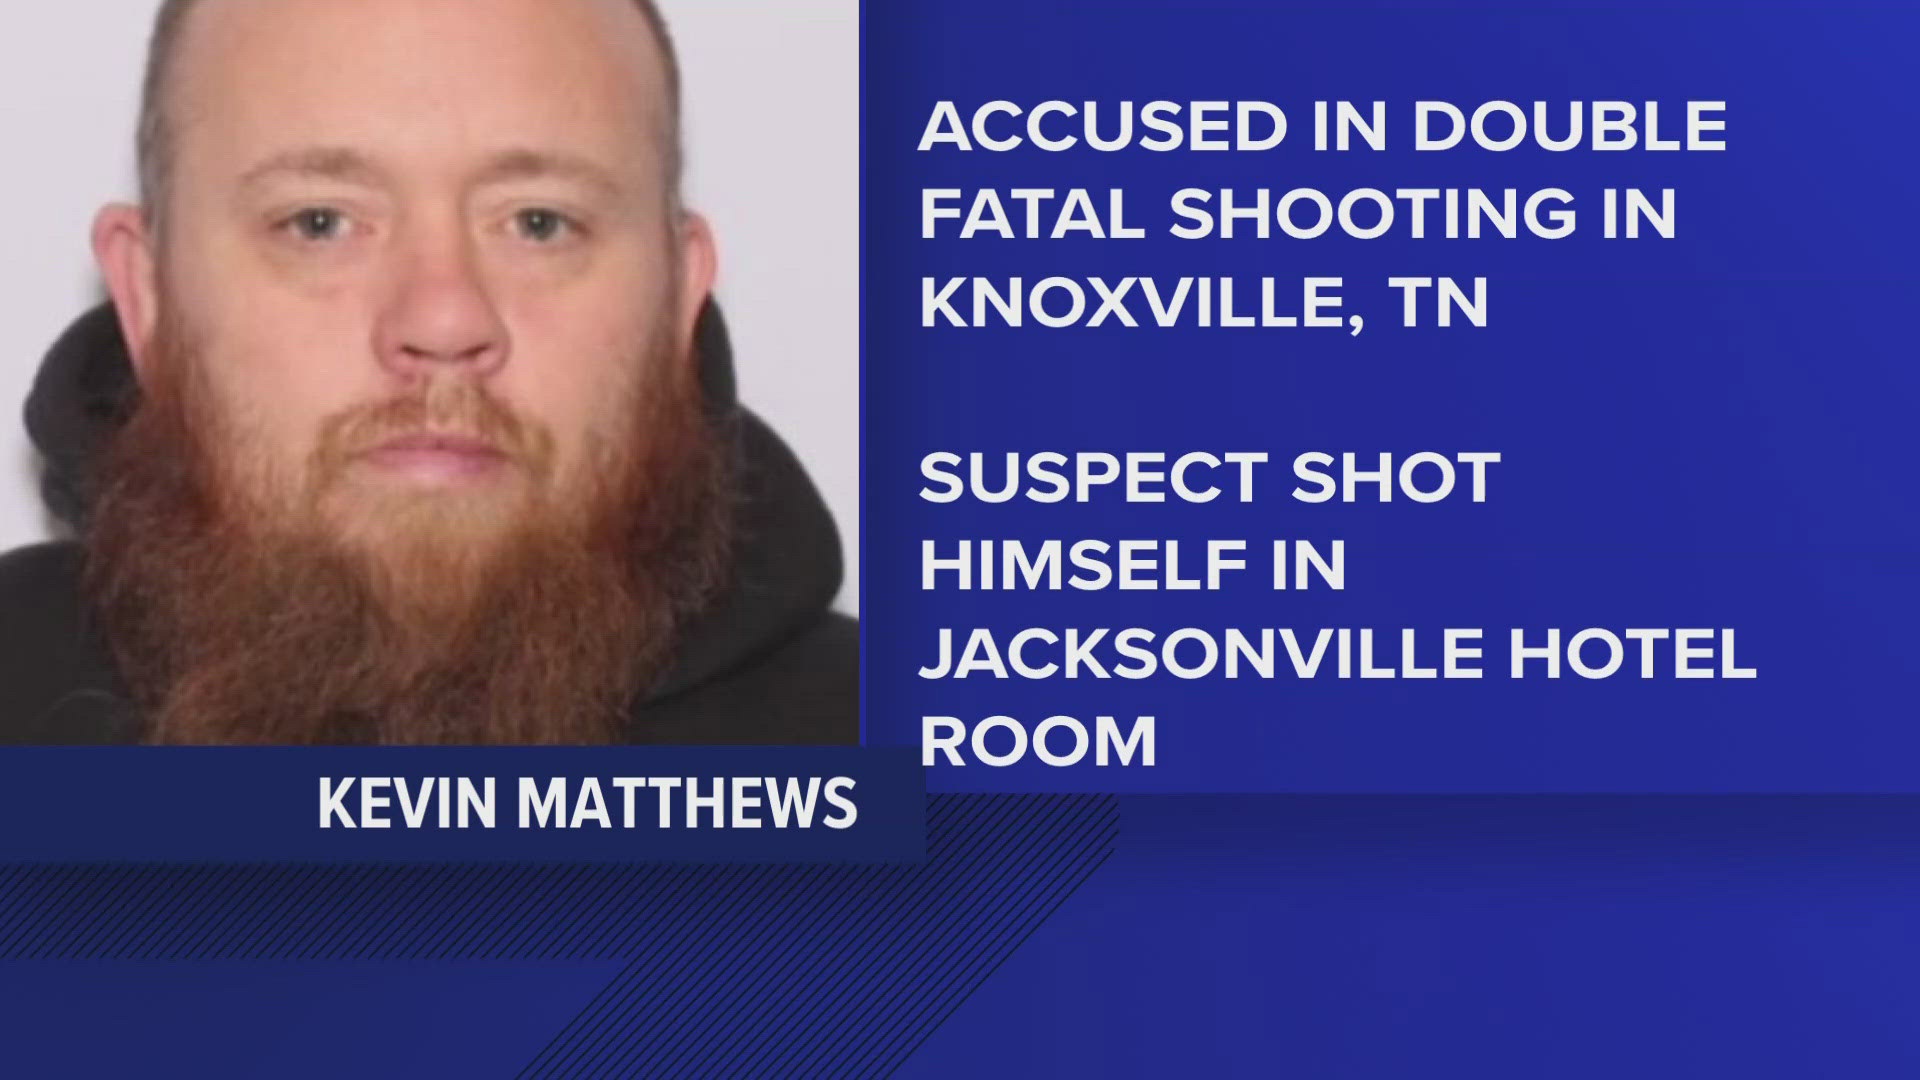 U.S. marshals tracked Kevin Matthews across state lines after he shot two people dead at a bar in Knoxville. He was found dead of a self-inflicted gunshot wound.